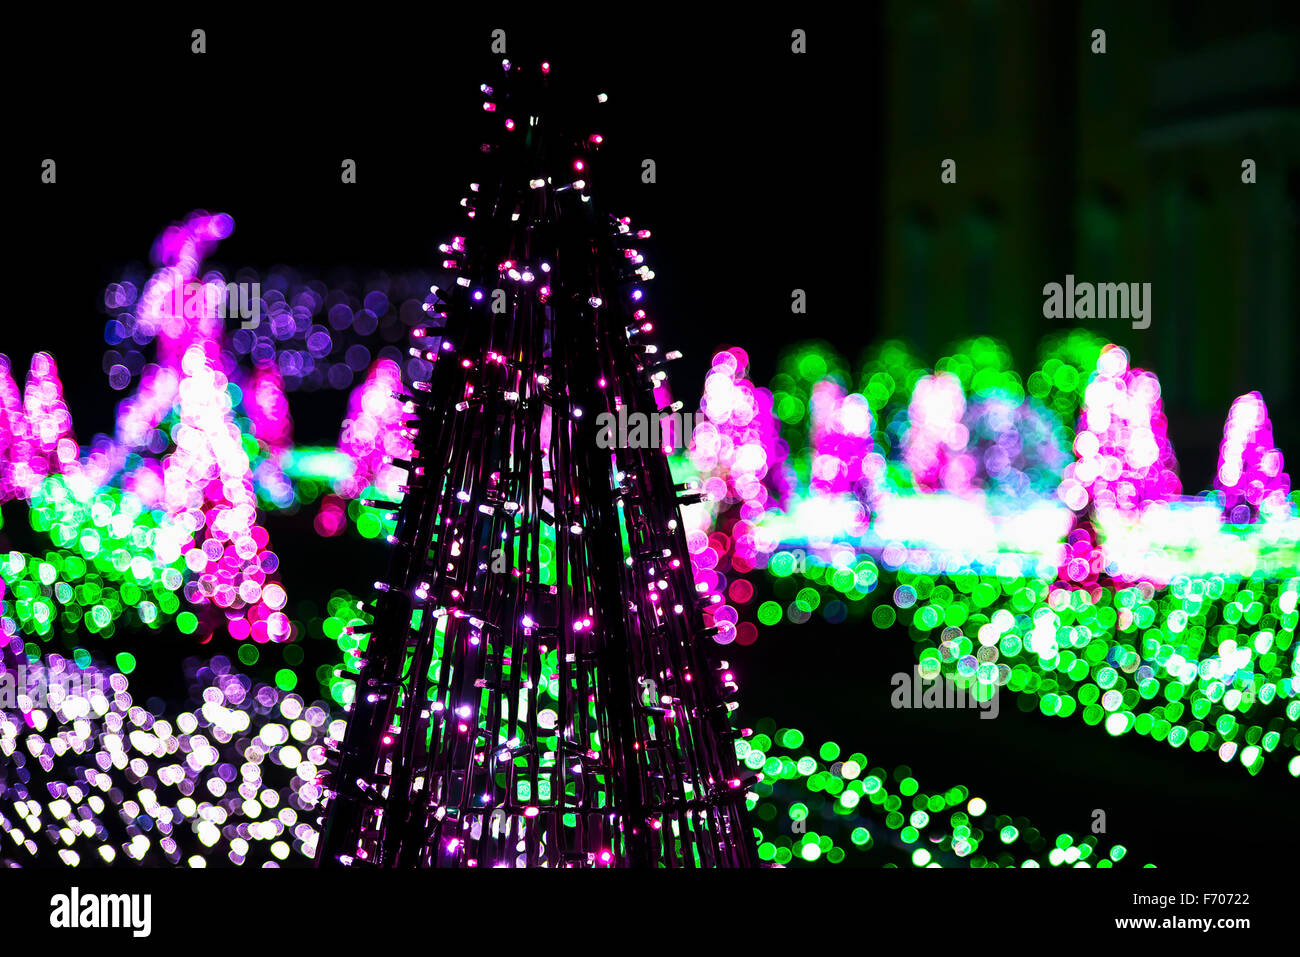 Christmas Tree made from Christmas Lighting Garland on Colorful Lights in Background at Building Stock Photo